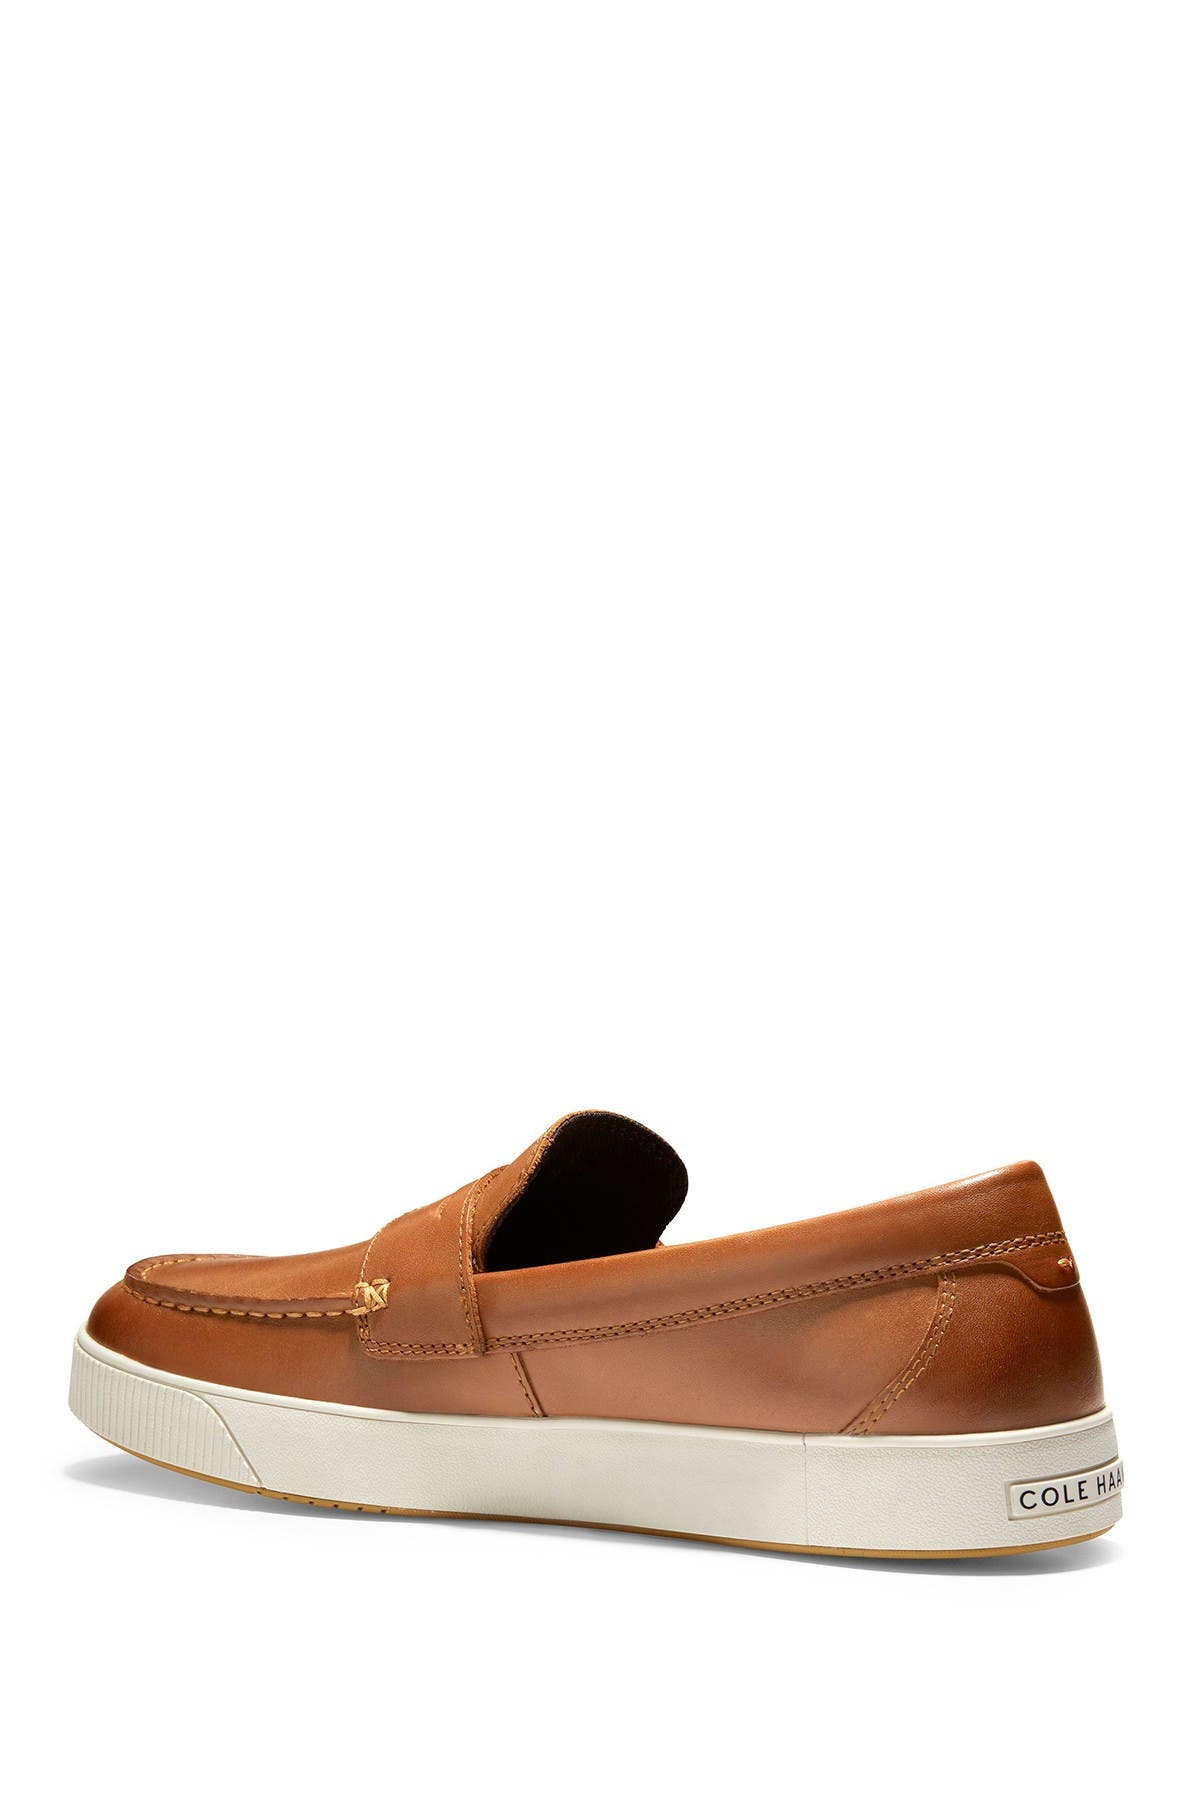 Cole Haan Nantucket 2.0 Penny Loafer 